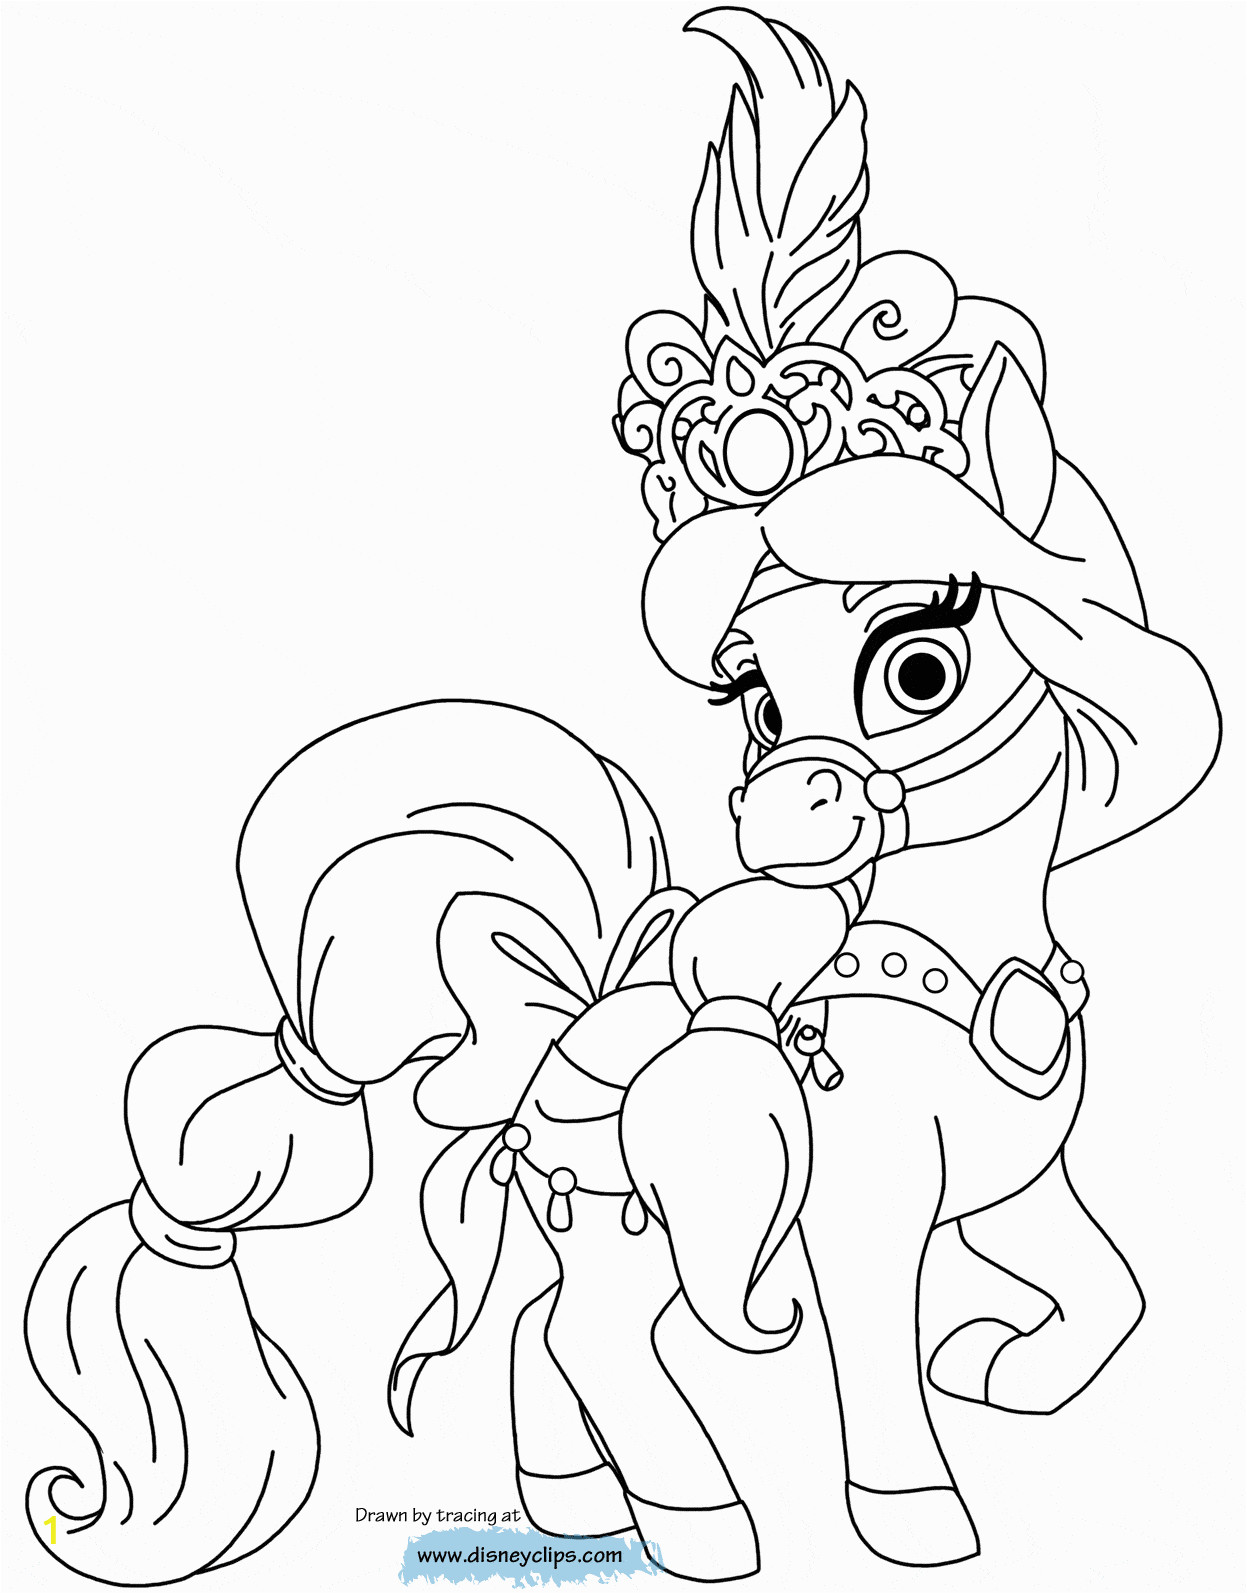 Disney Princess Halloween Coloring Pages Disney Palace Pets Coloring Pages